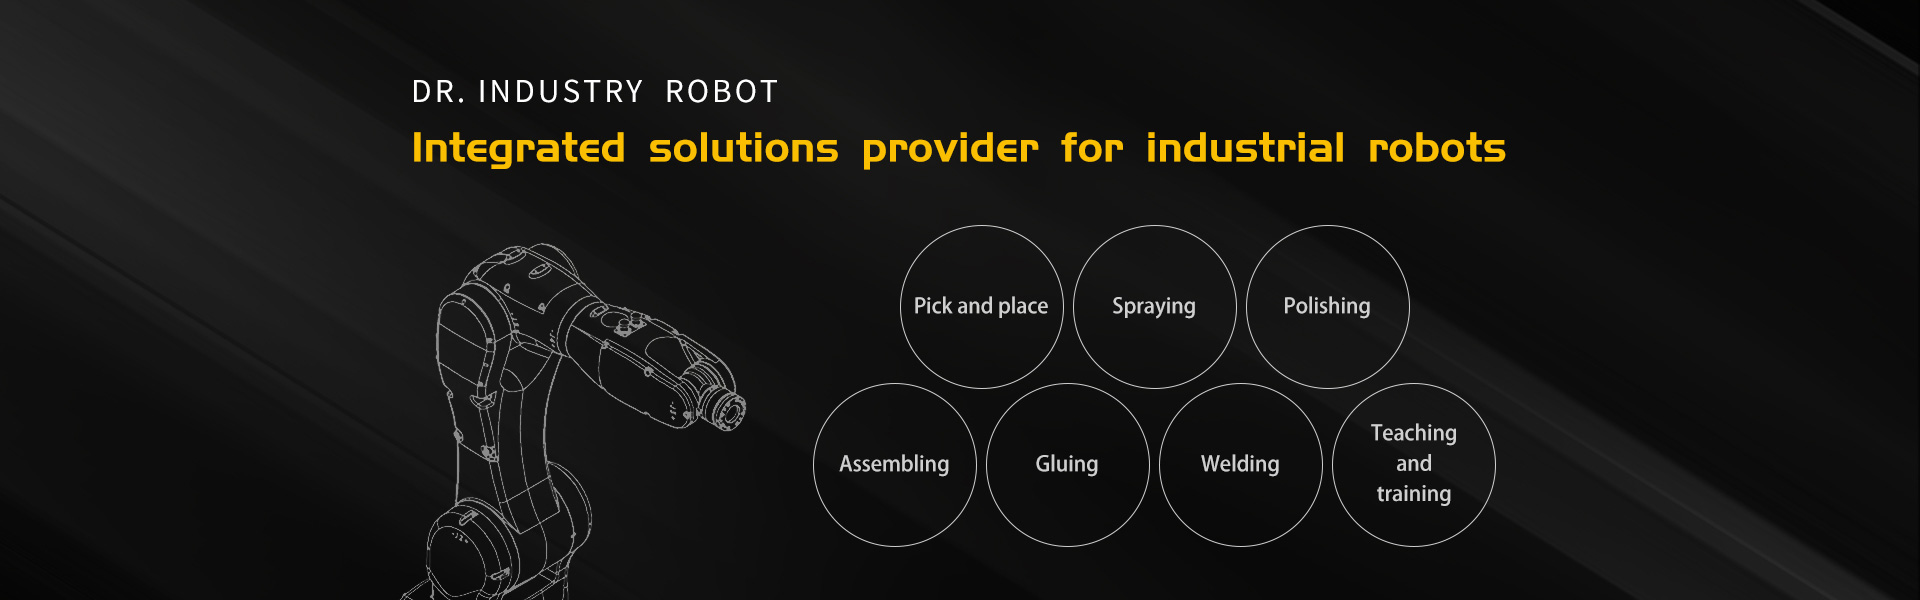 Integrated solutions provider for industrial robots